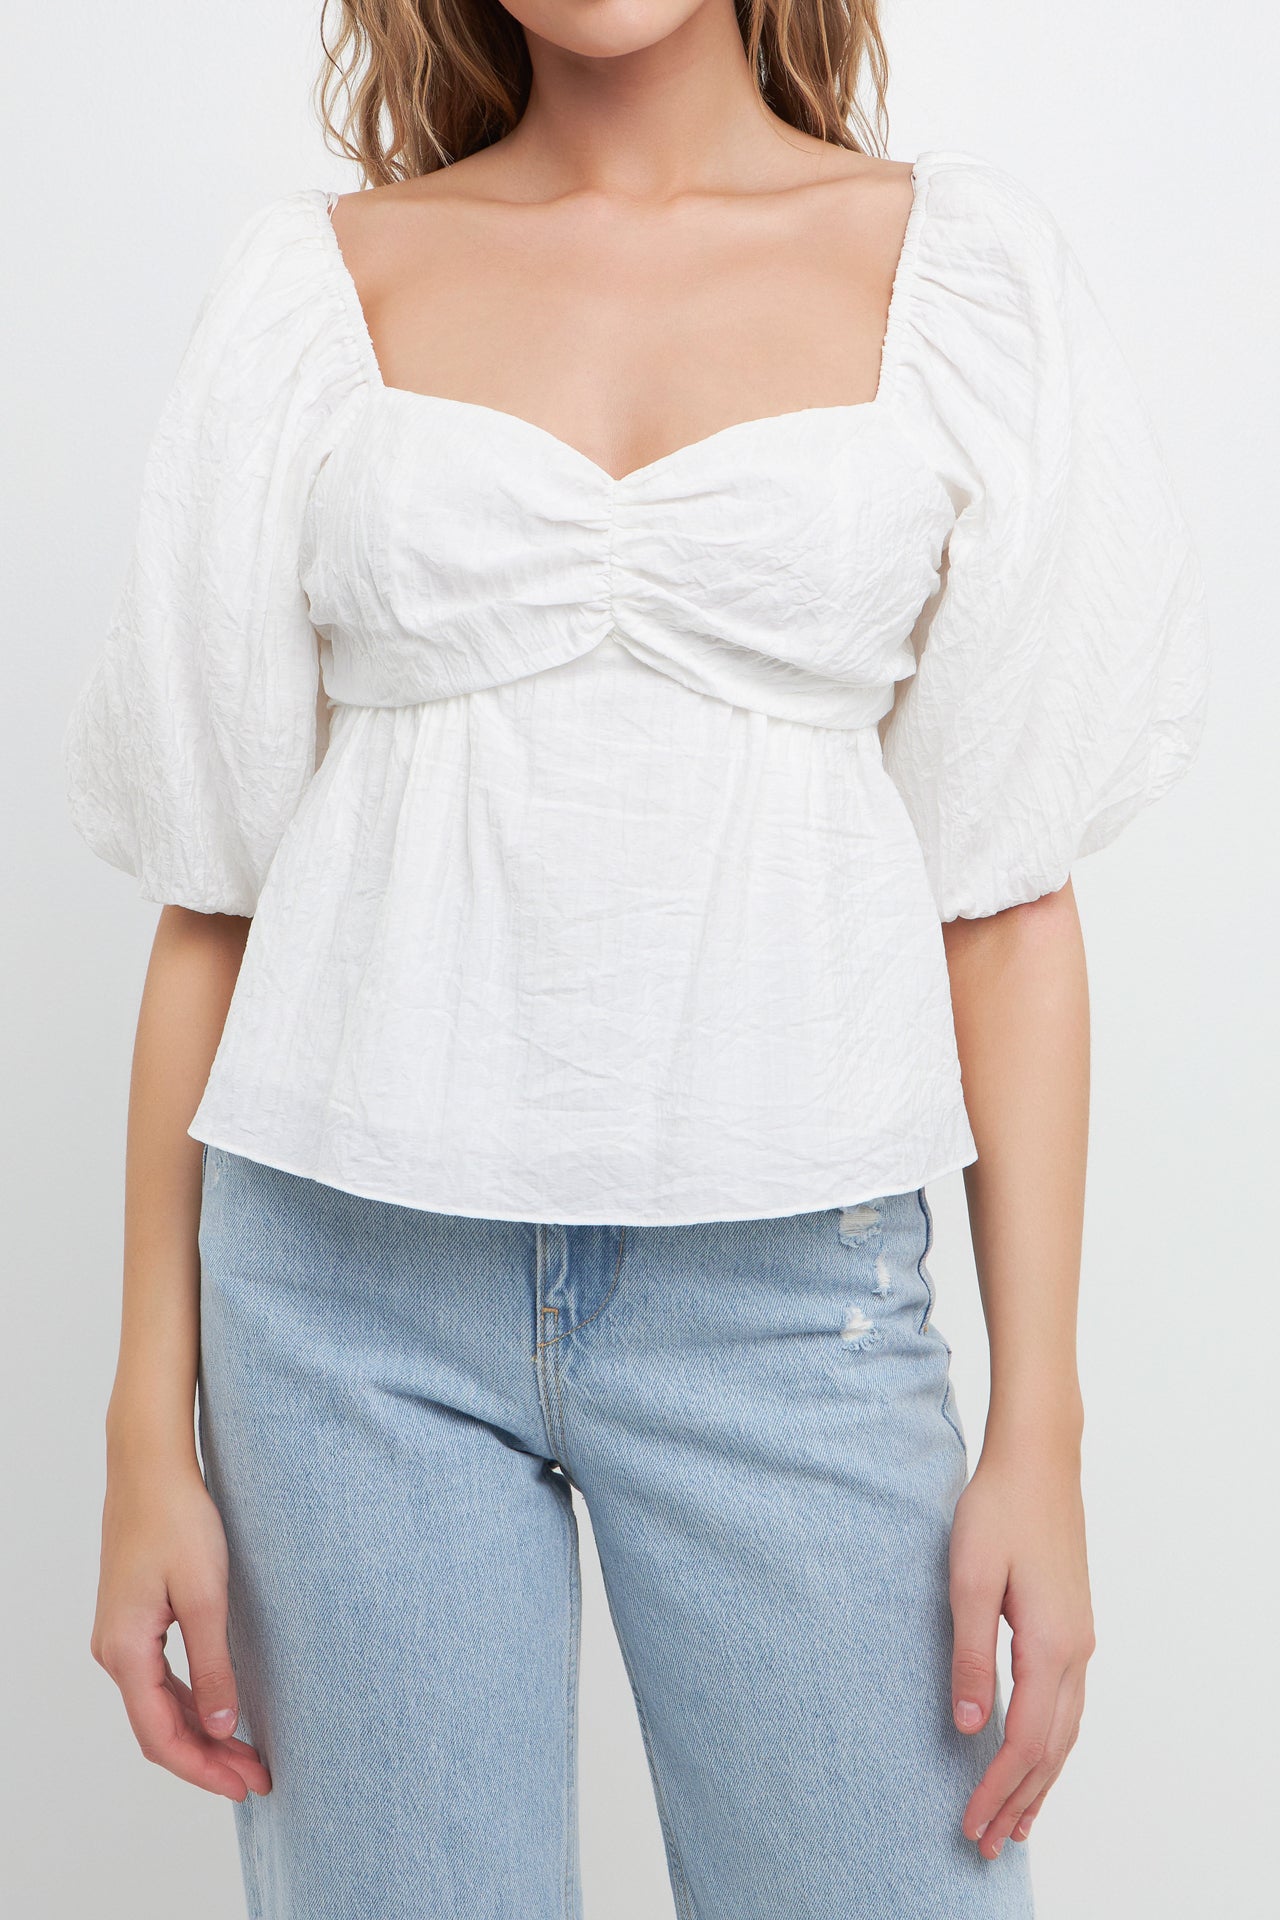 FREE THE ROSES - Textured Back Tied Top - TOPS available at Objectrare